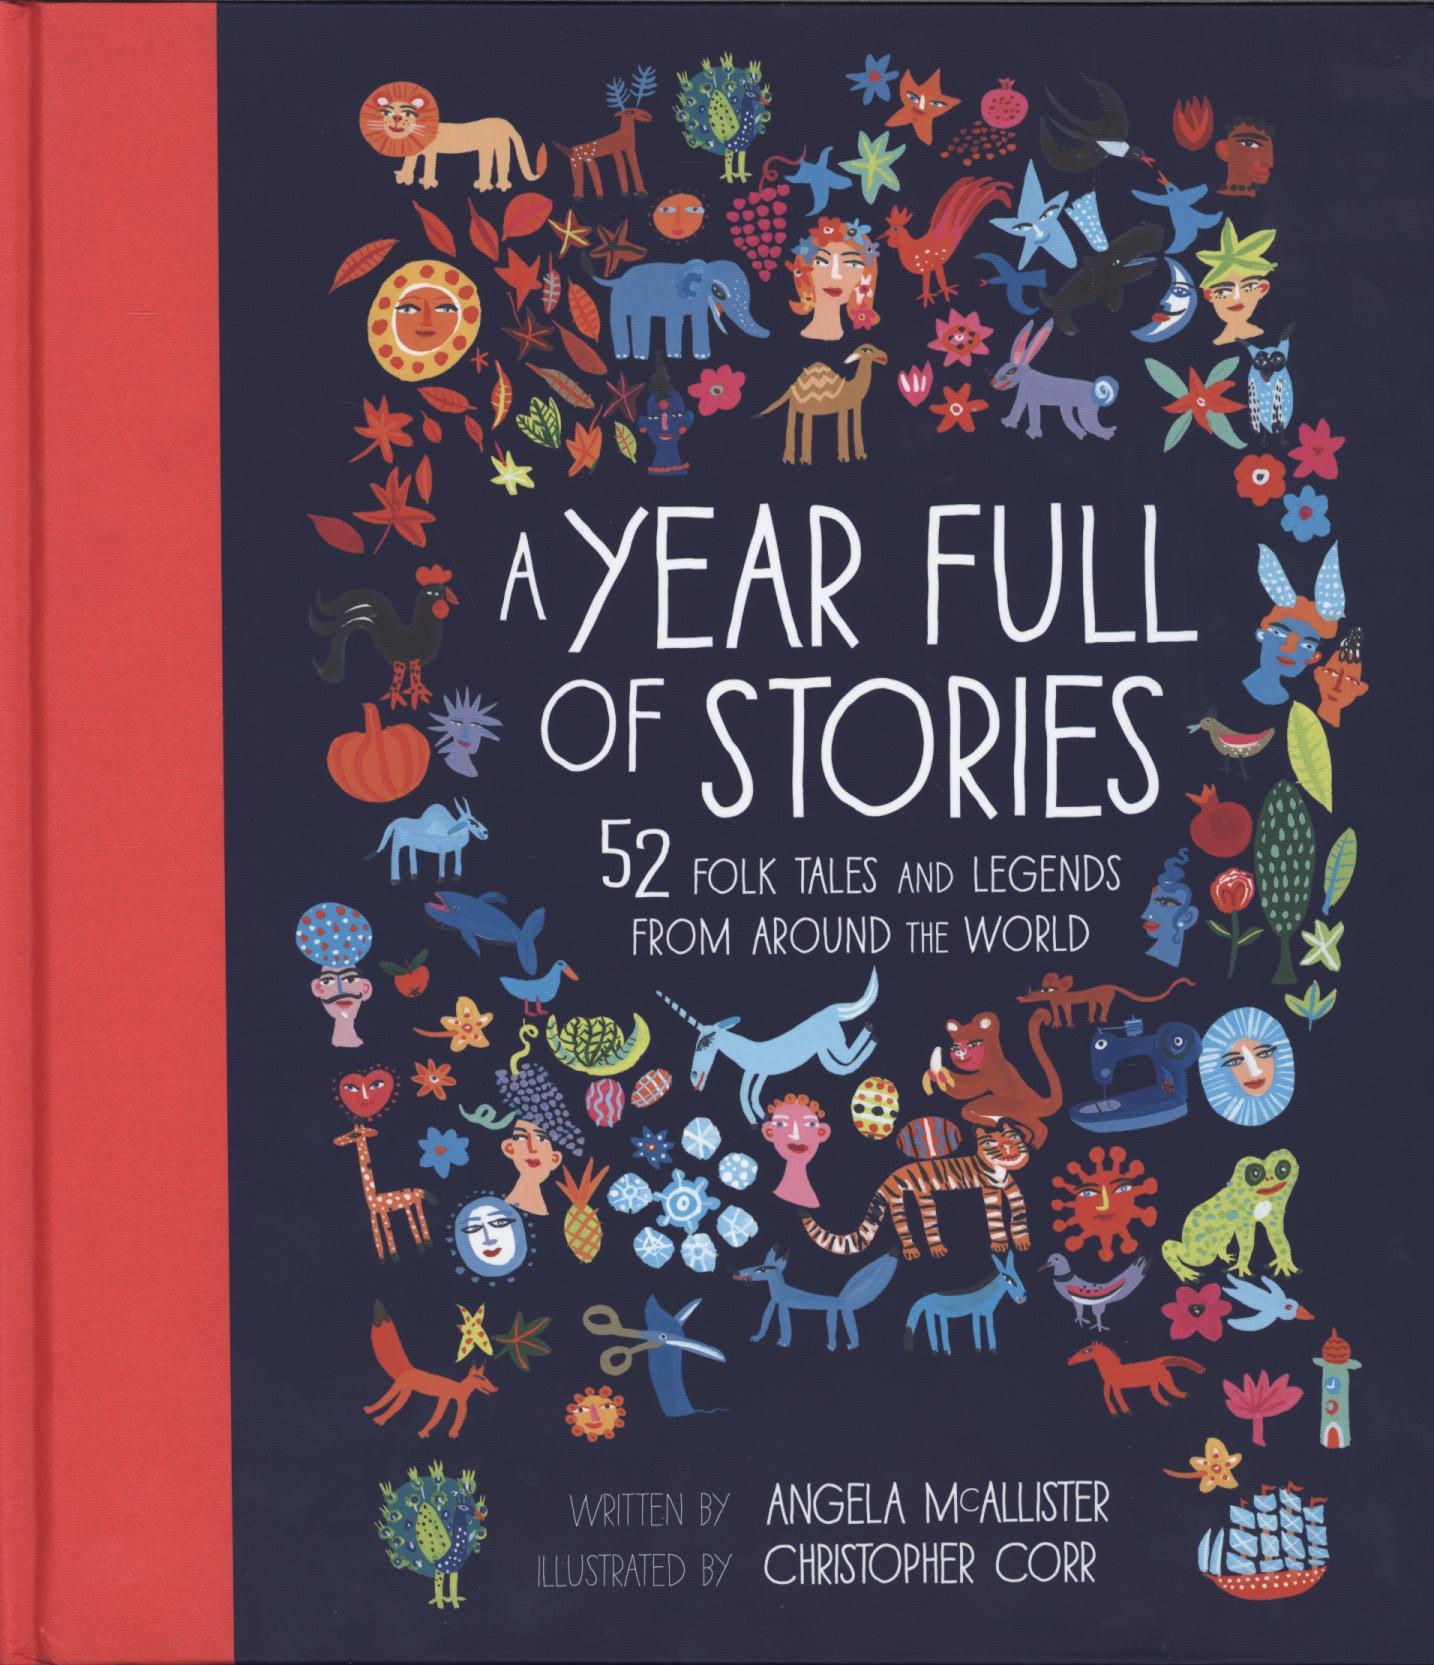 Year Full of Stories